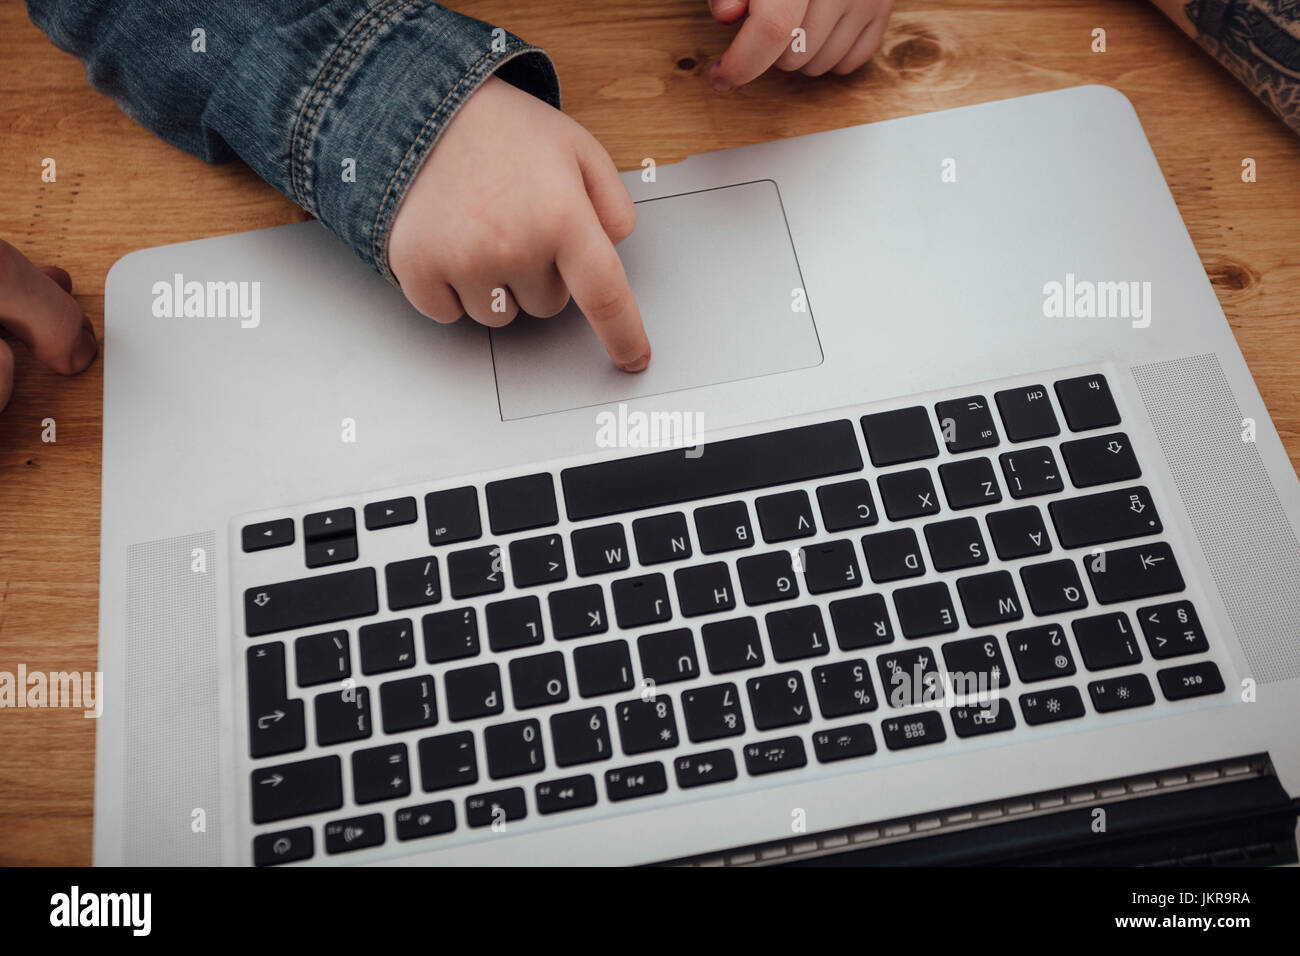 Cropped image of girl scrolling on laptop at wooden table Stock Photo